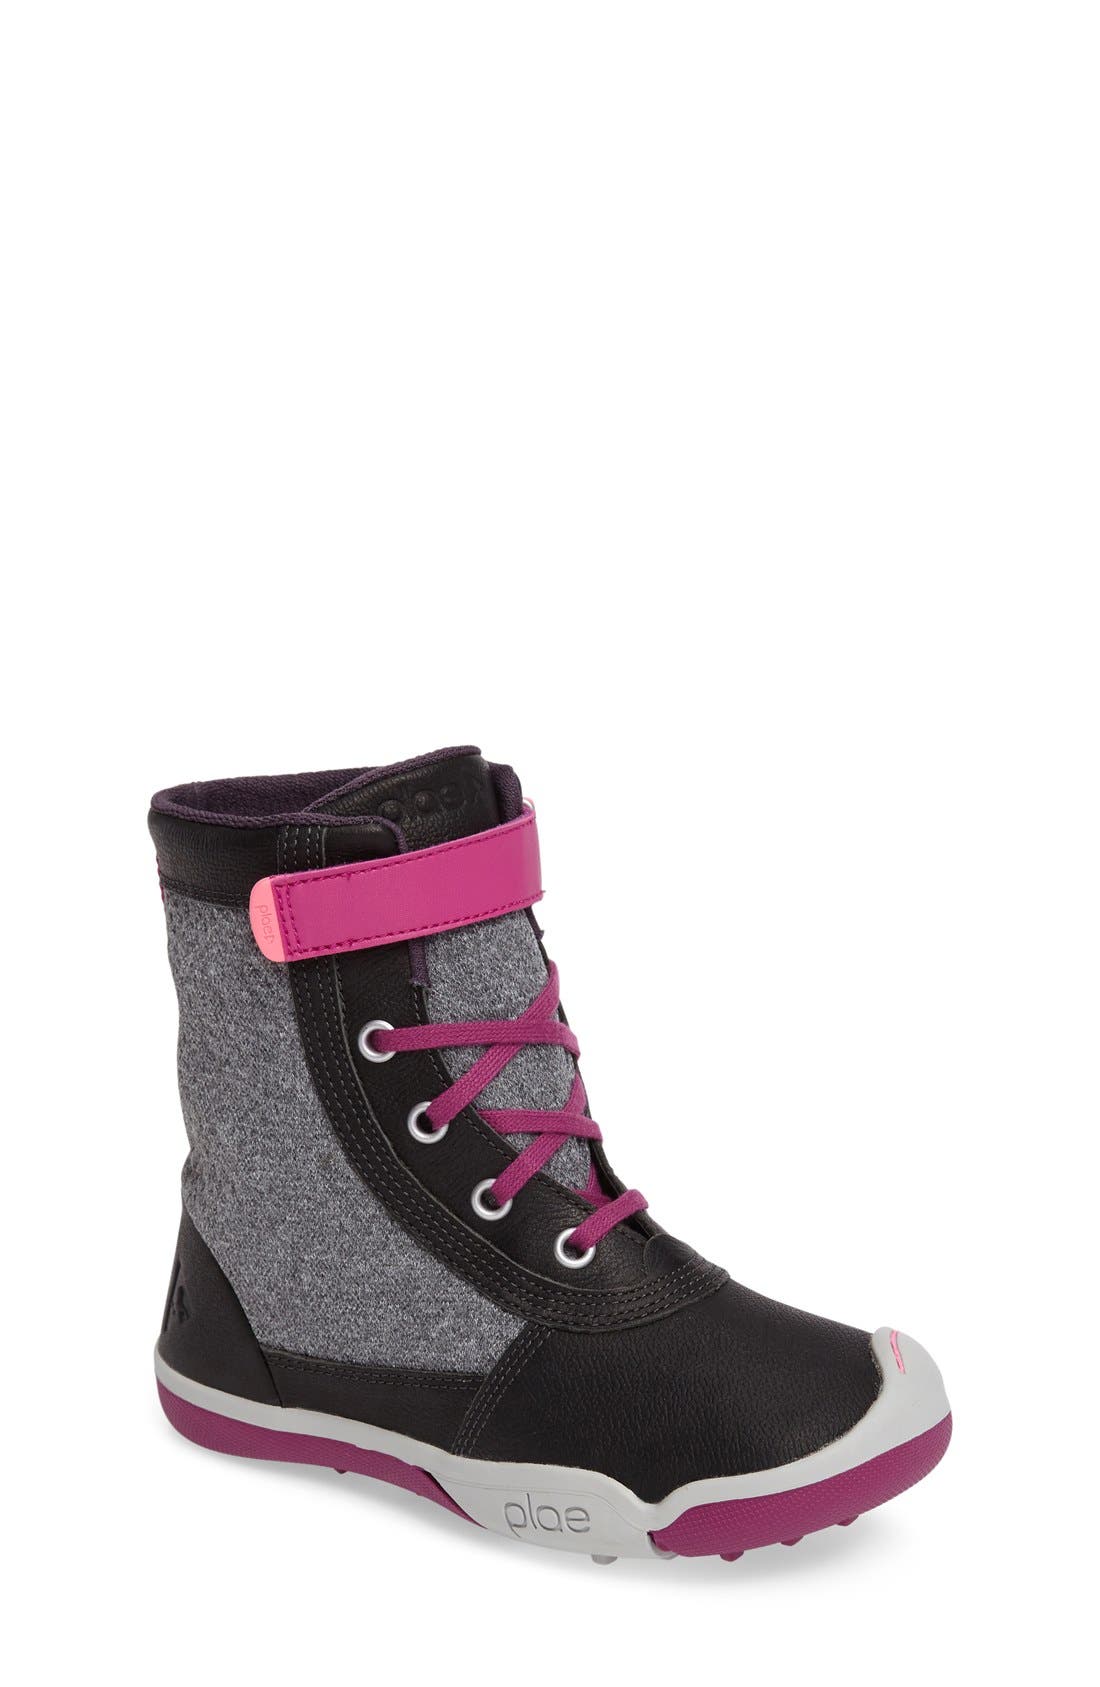 plae kids boots